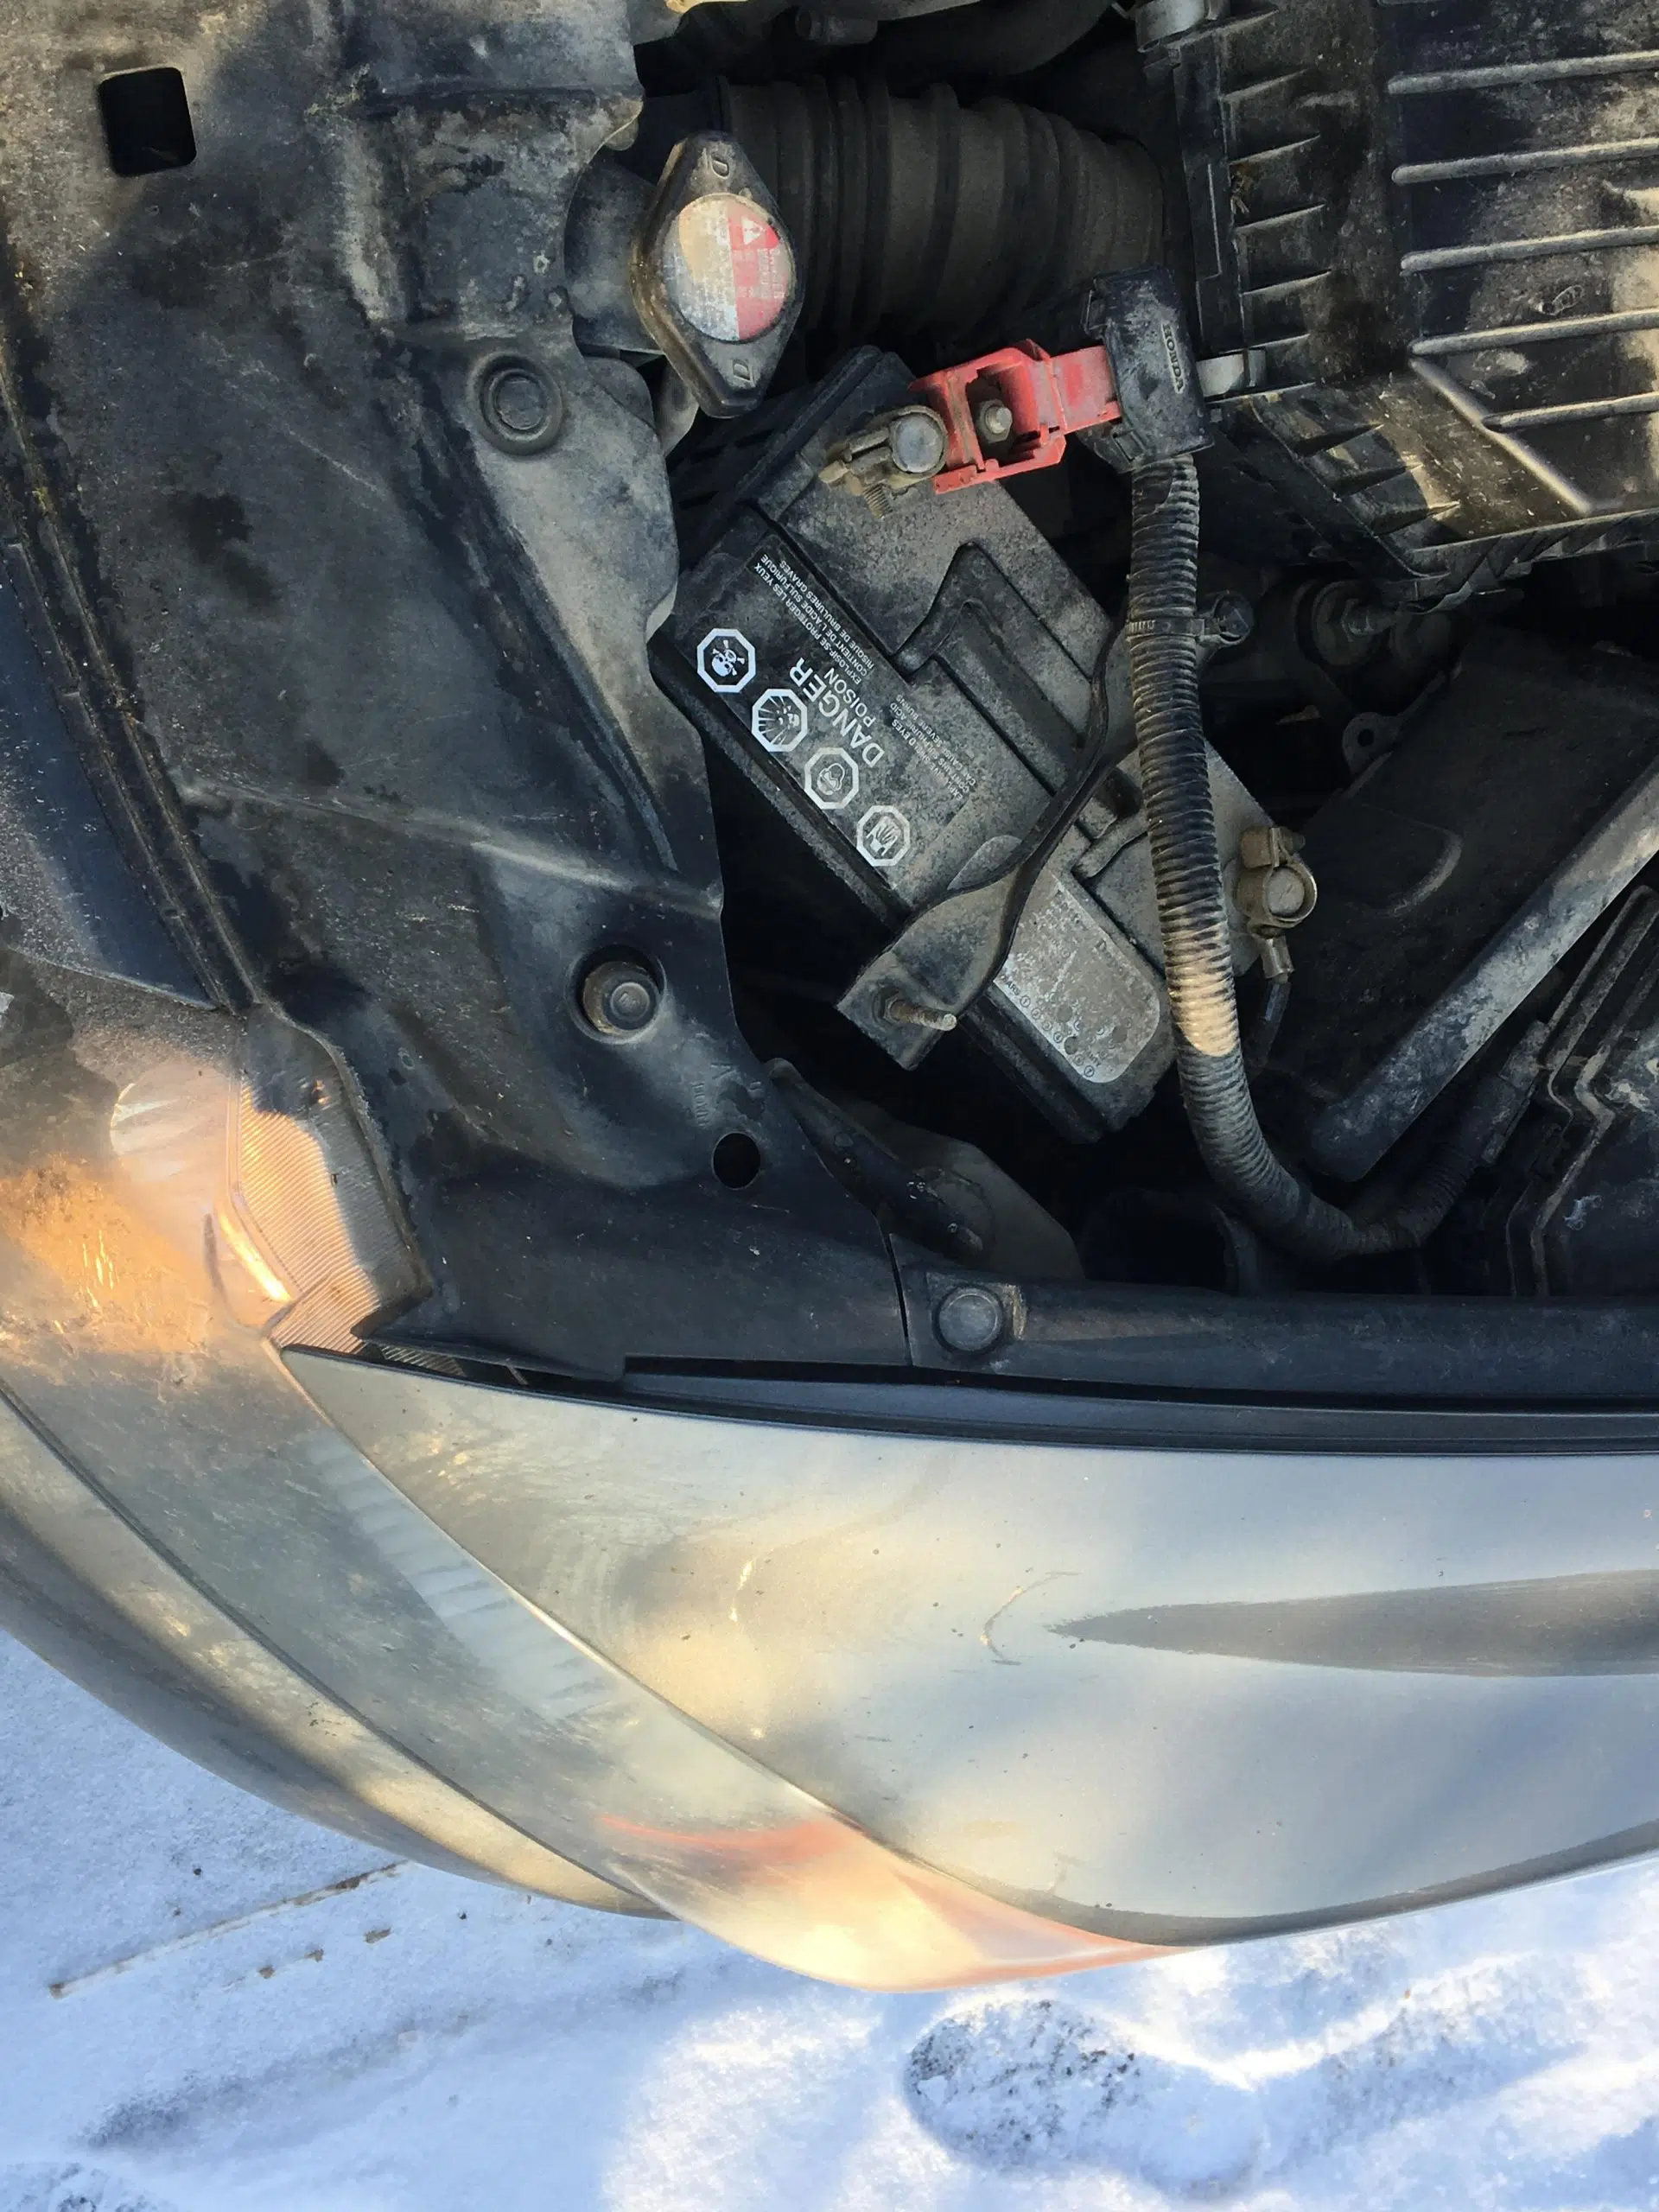 Cold weather means it's time to check your car battery